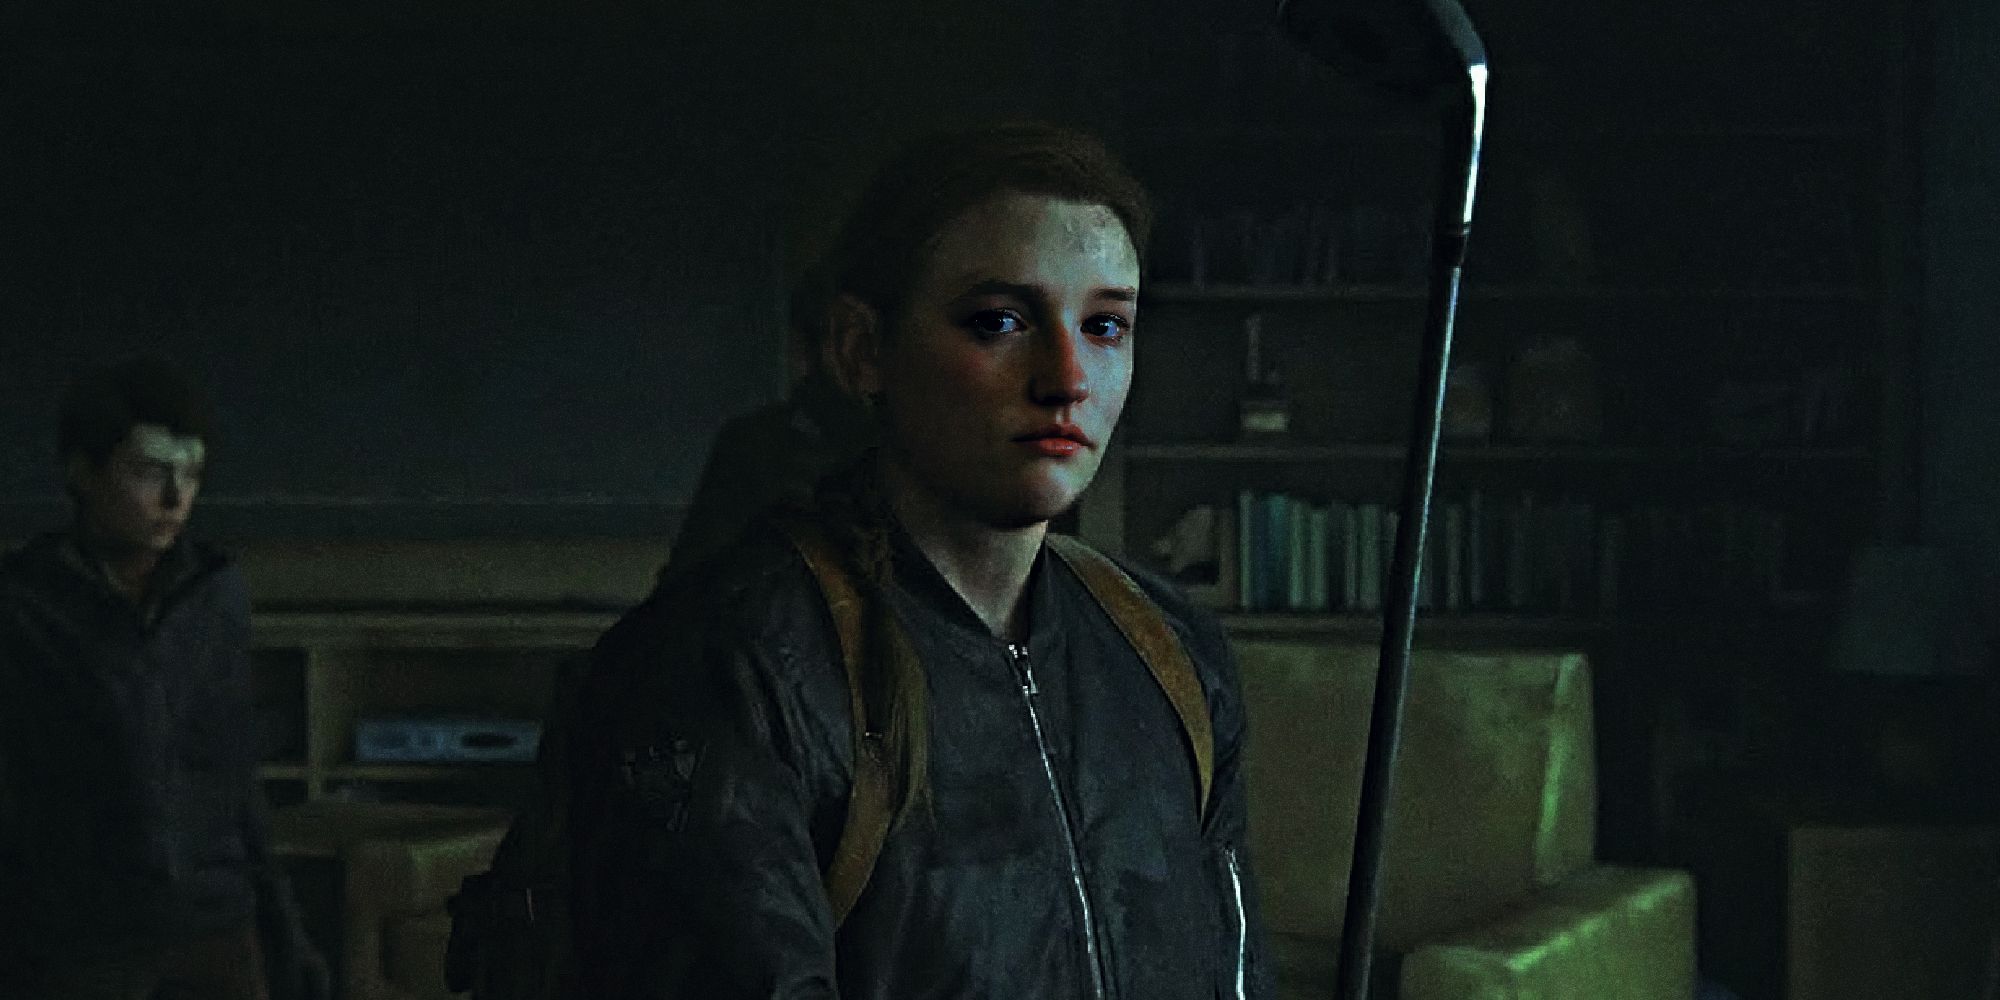 Kaitlyn Dever's face photoshopped onto Abby from the Last of Us in the golf club scene